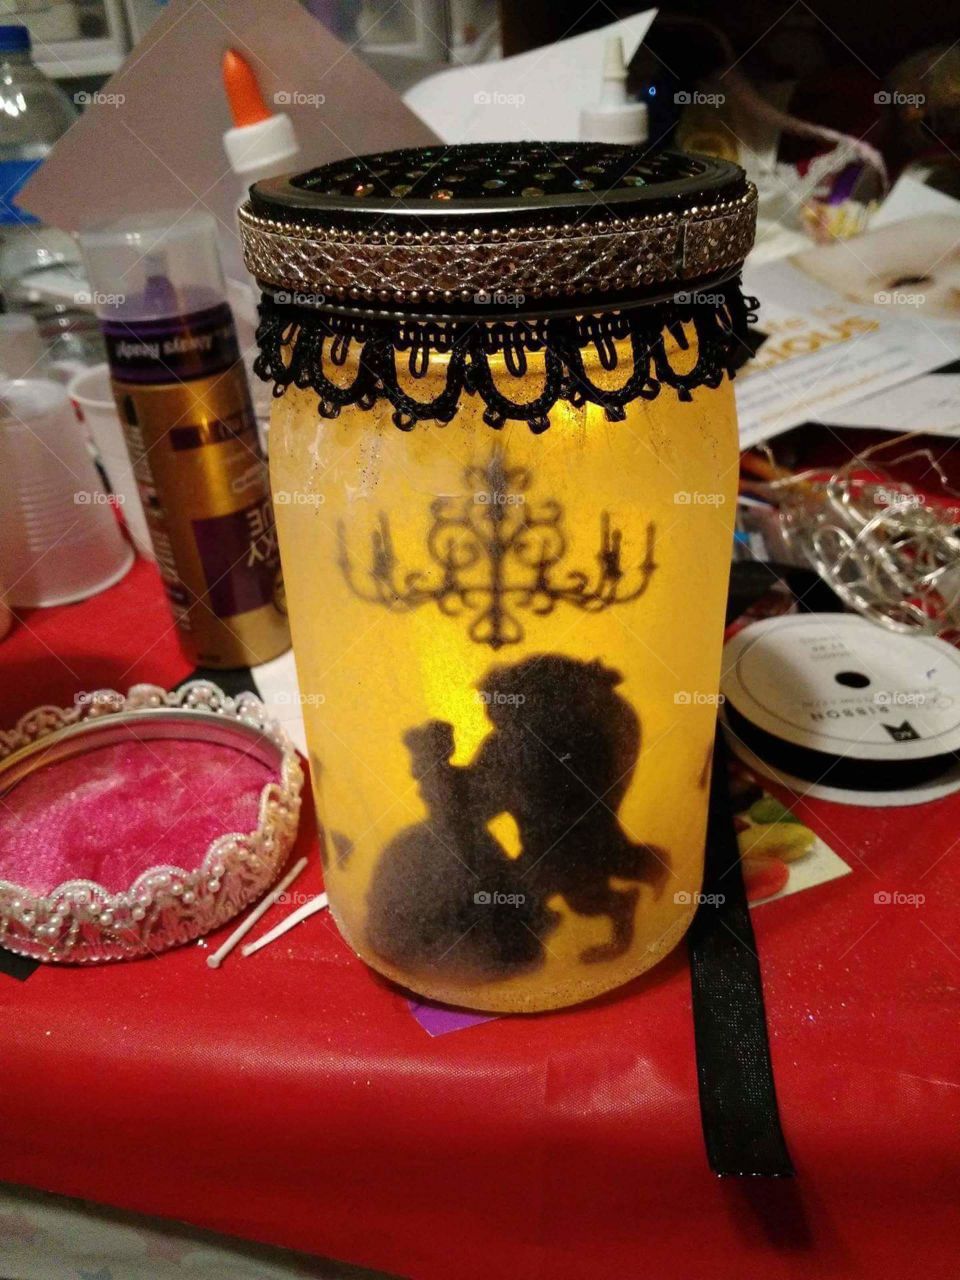 Disney Inspired Silhouette Beauty and the Beast Lantern.